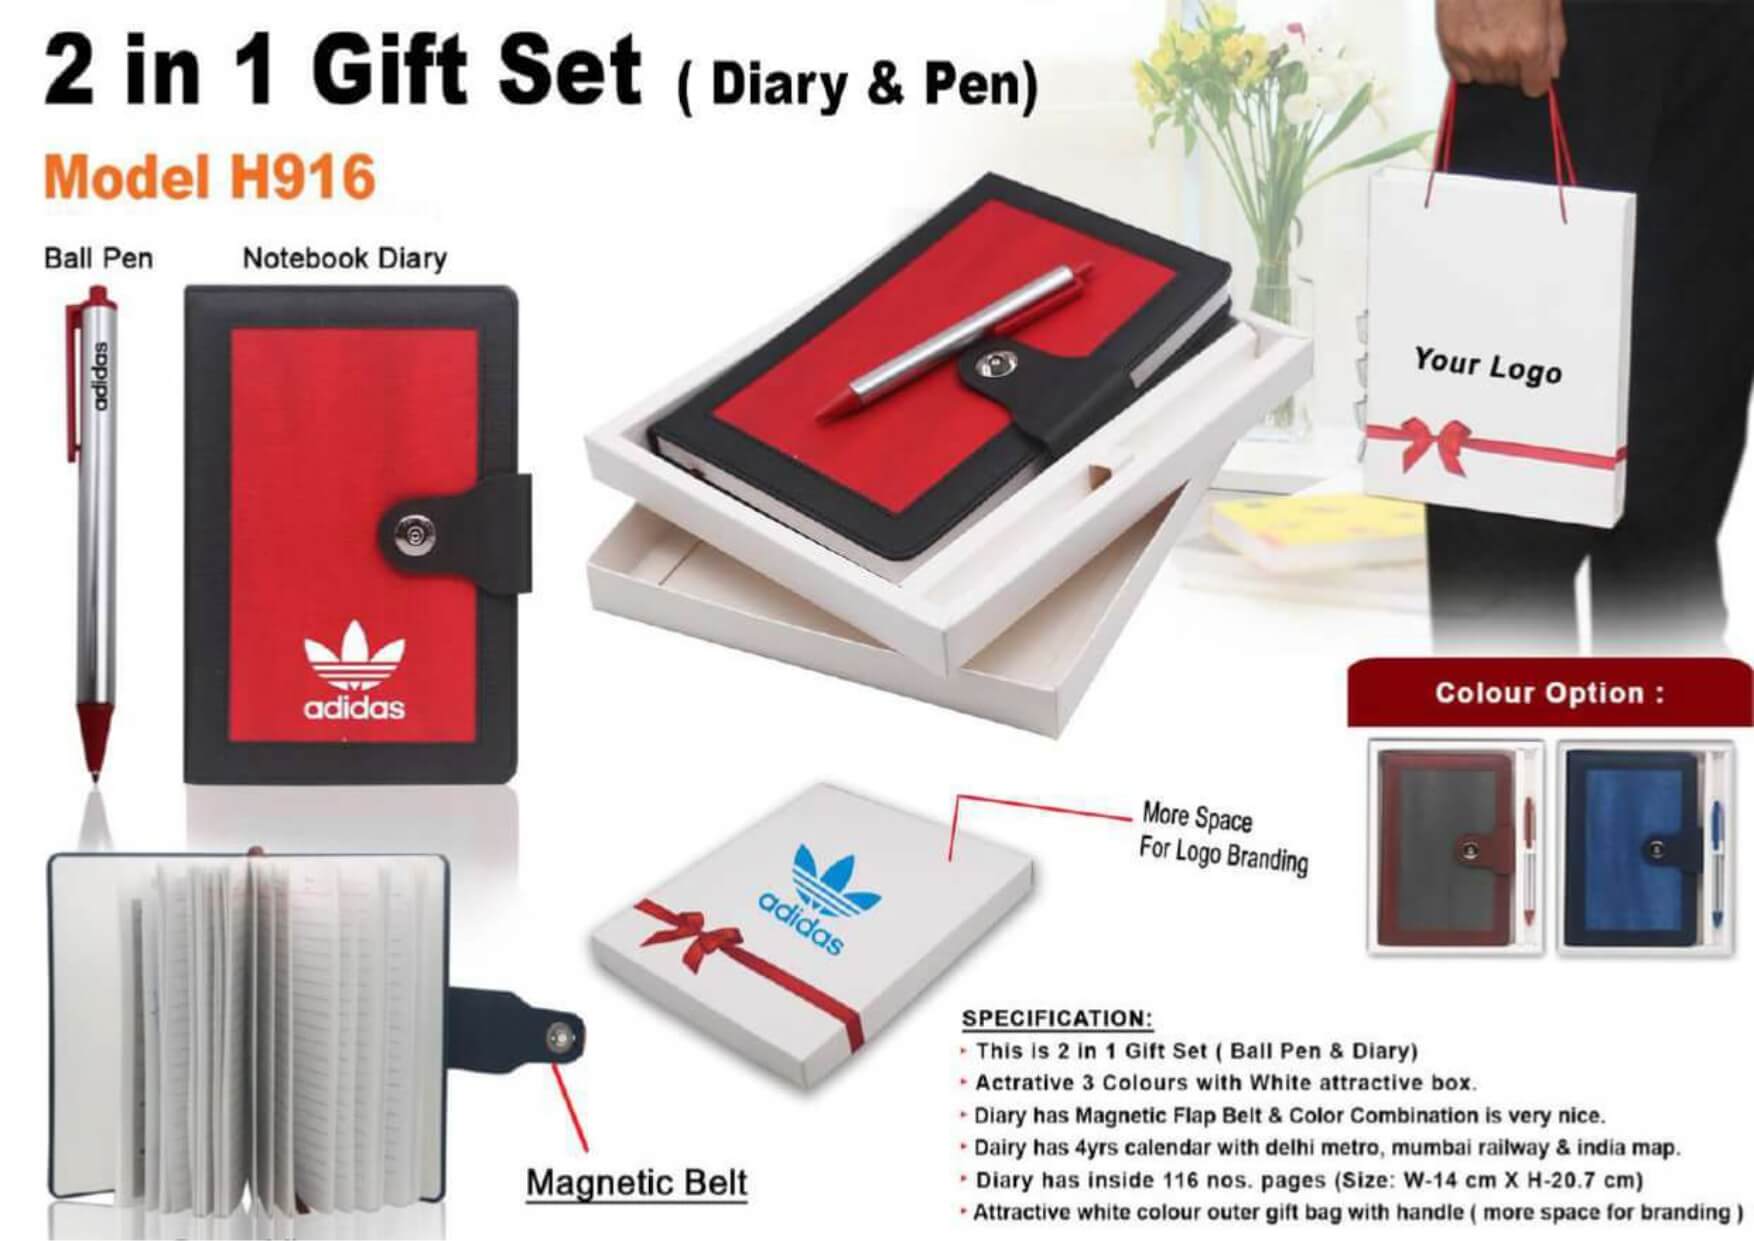 2 in 1 Gift Set Diary and Pen 916